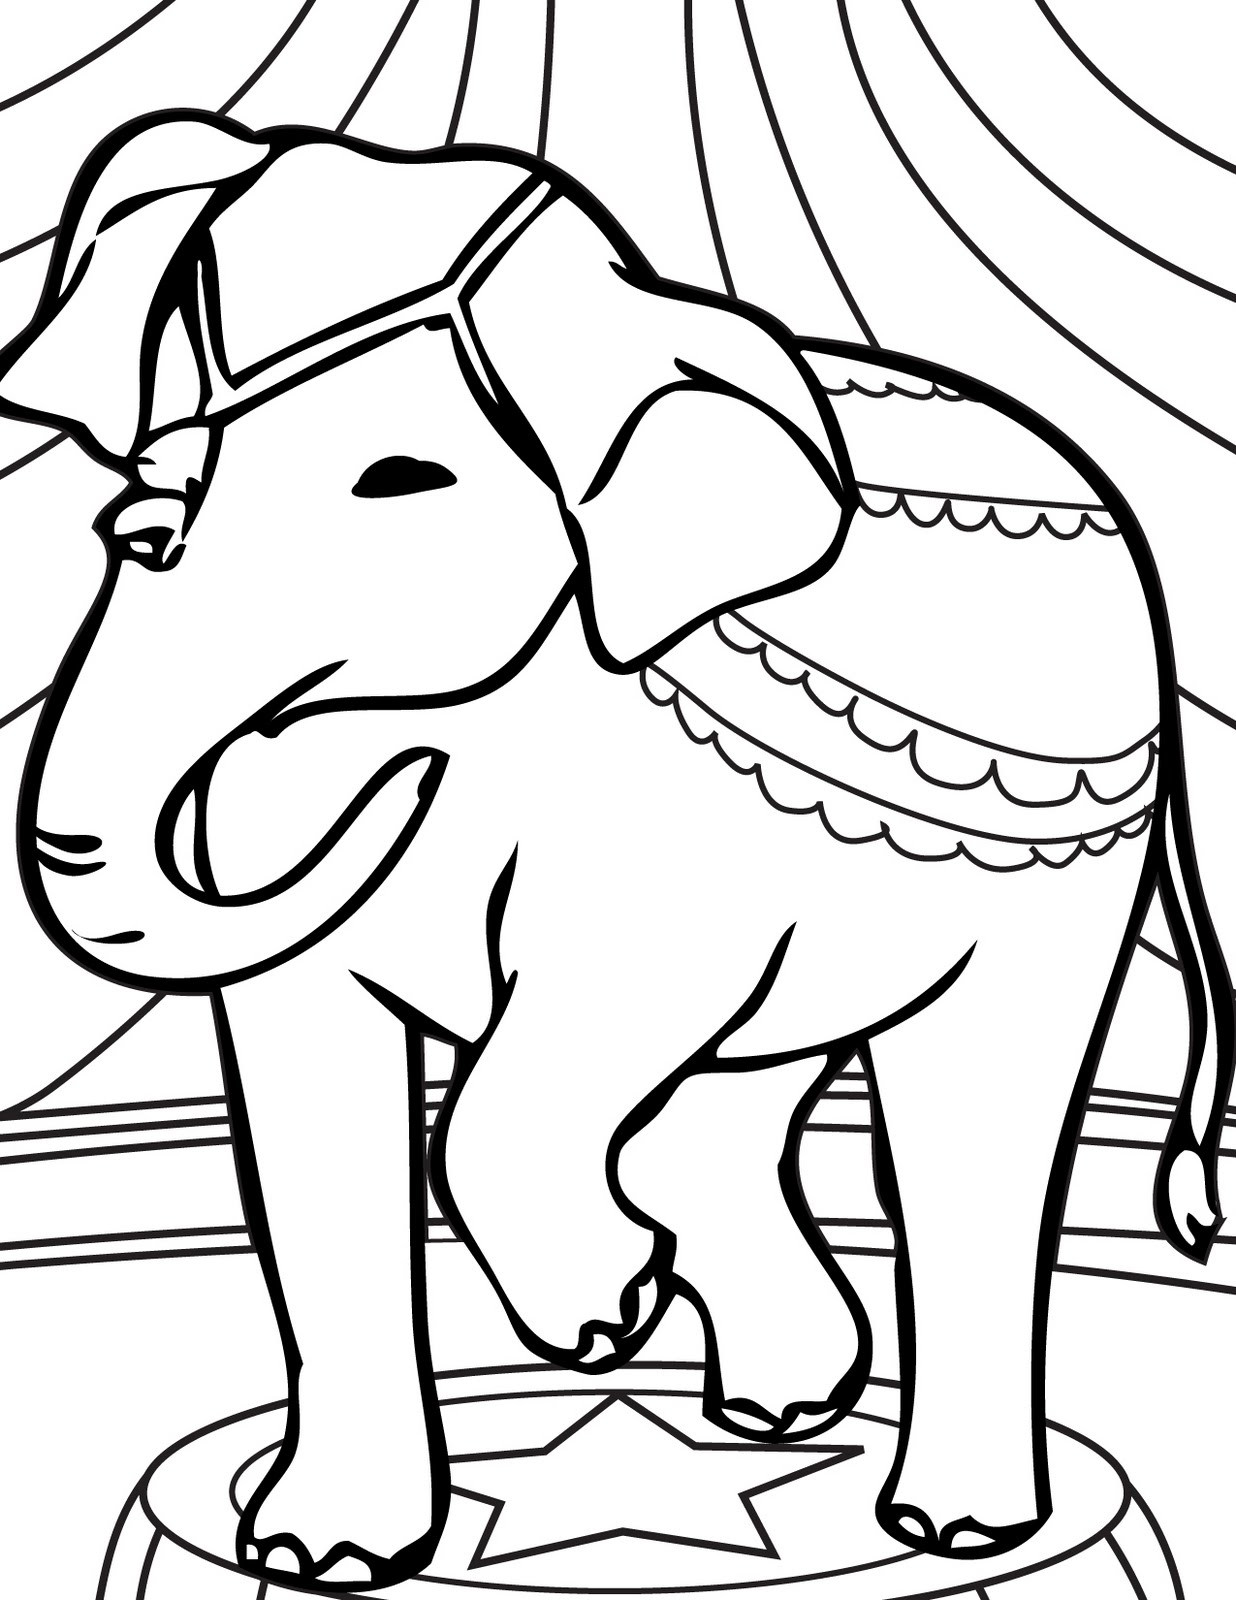 Toddler Coloring Pages Printable
 transmissionpress Circus Elephant Coloring Pages